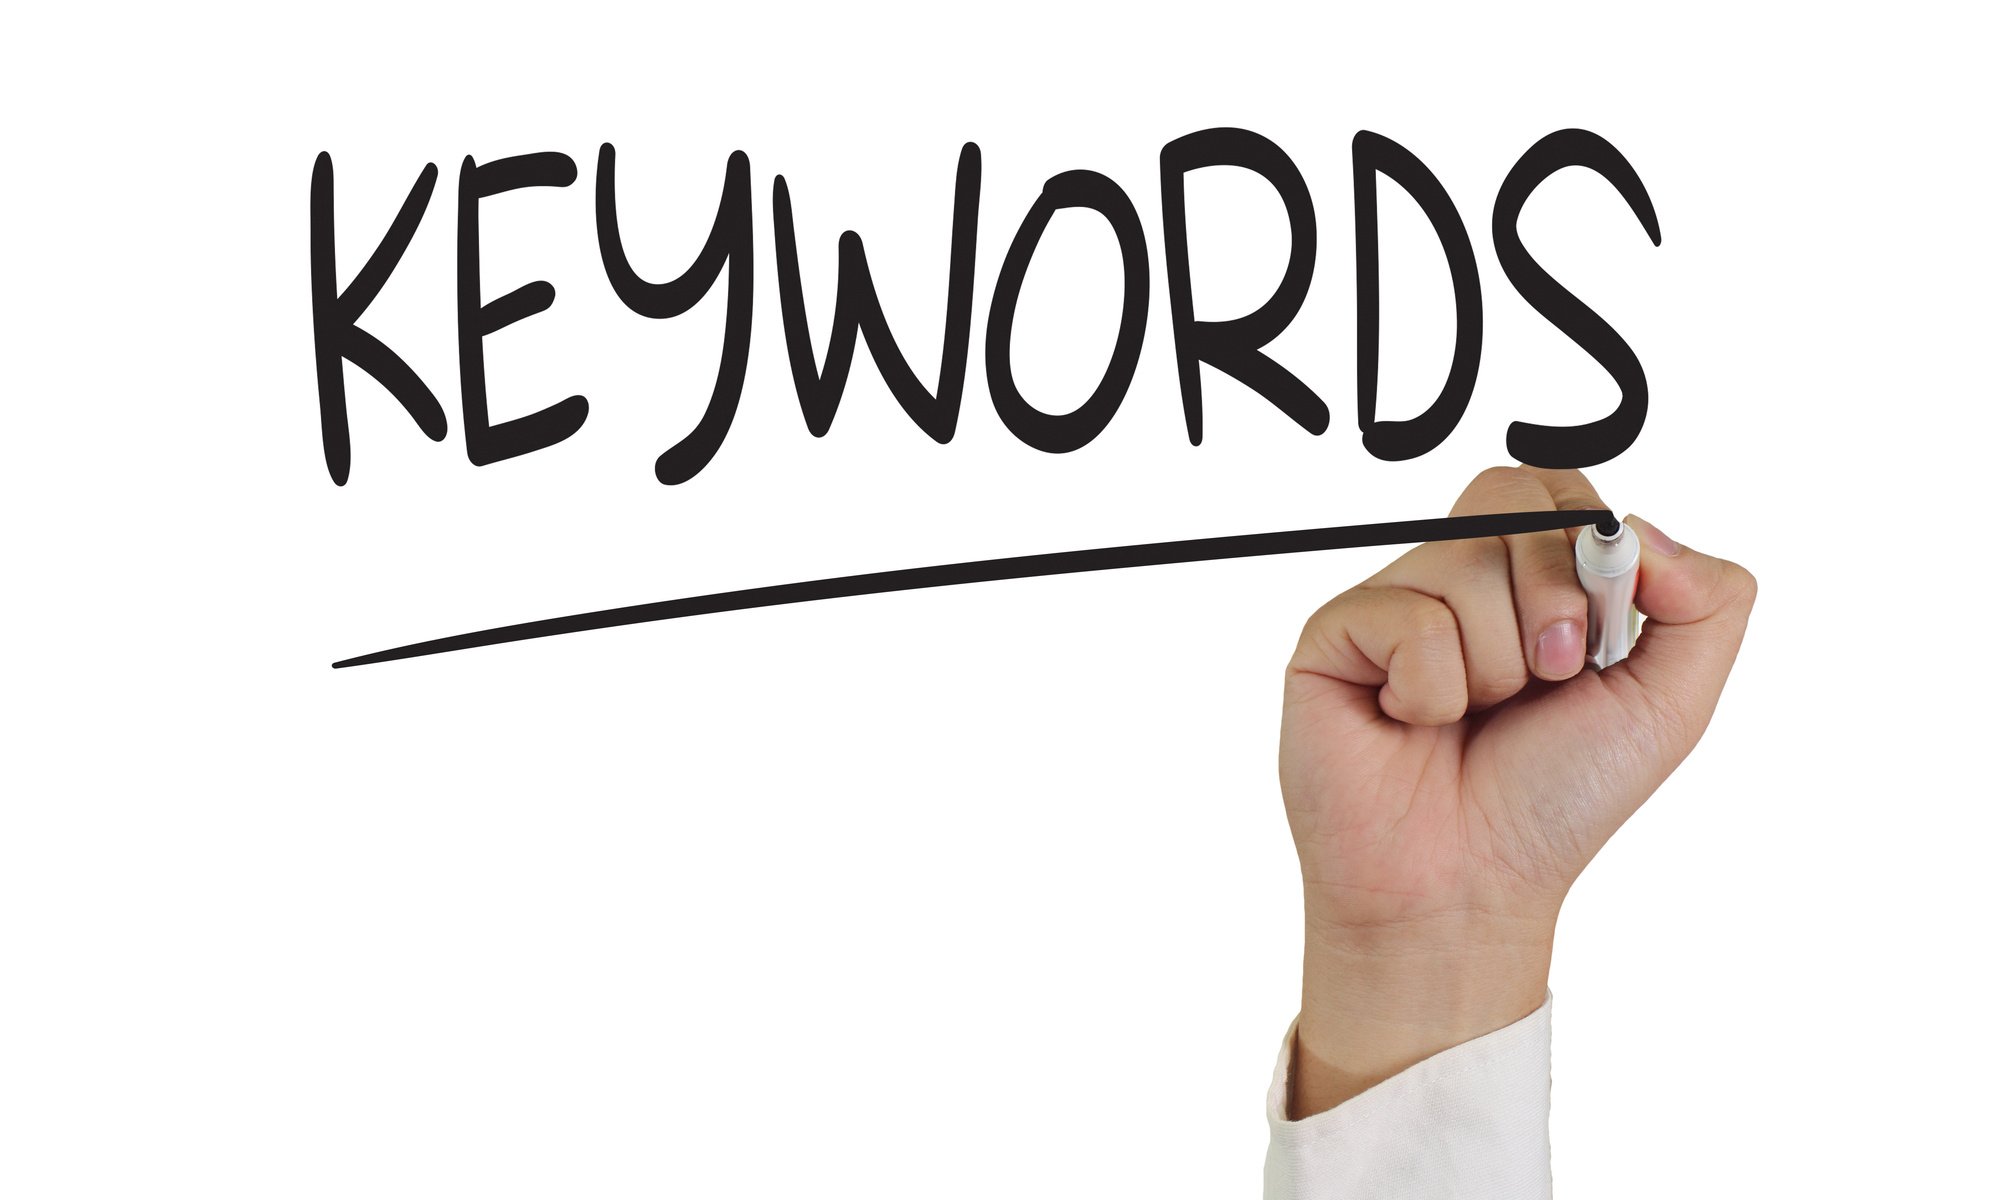 Keyword Discovery: 6 Tips for Finding the Perfect Keywords